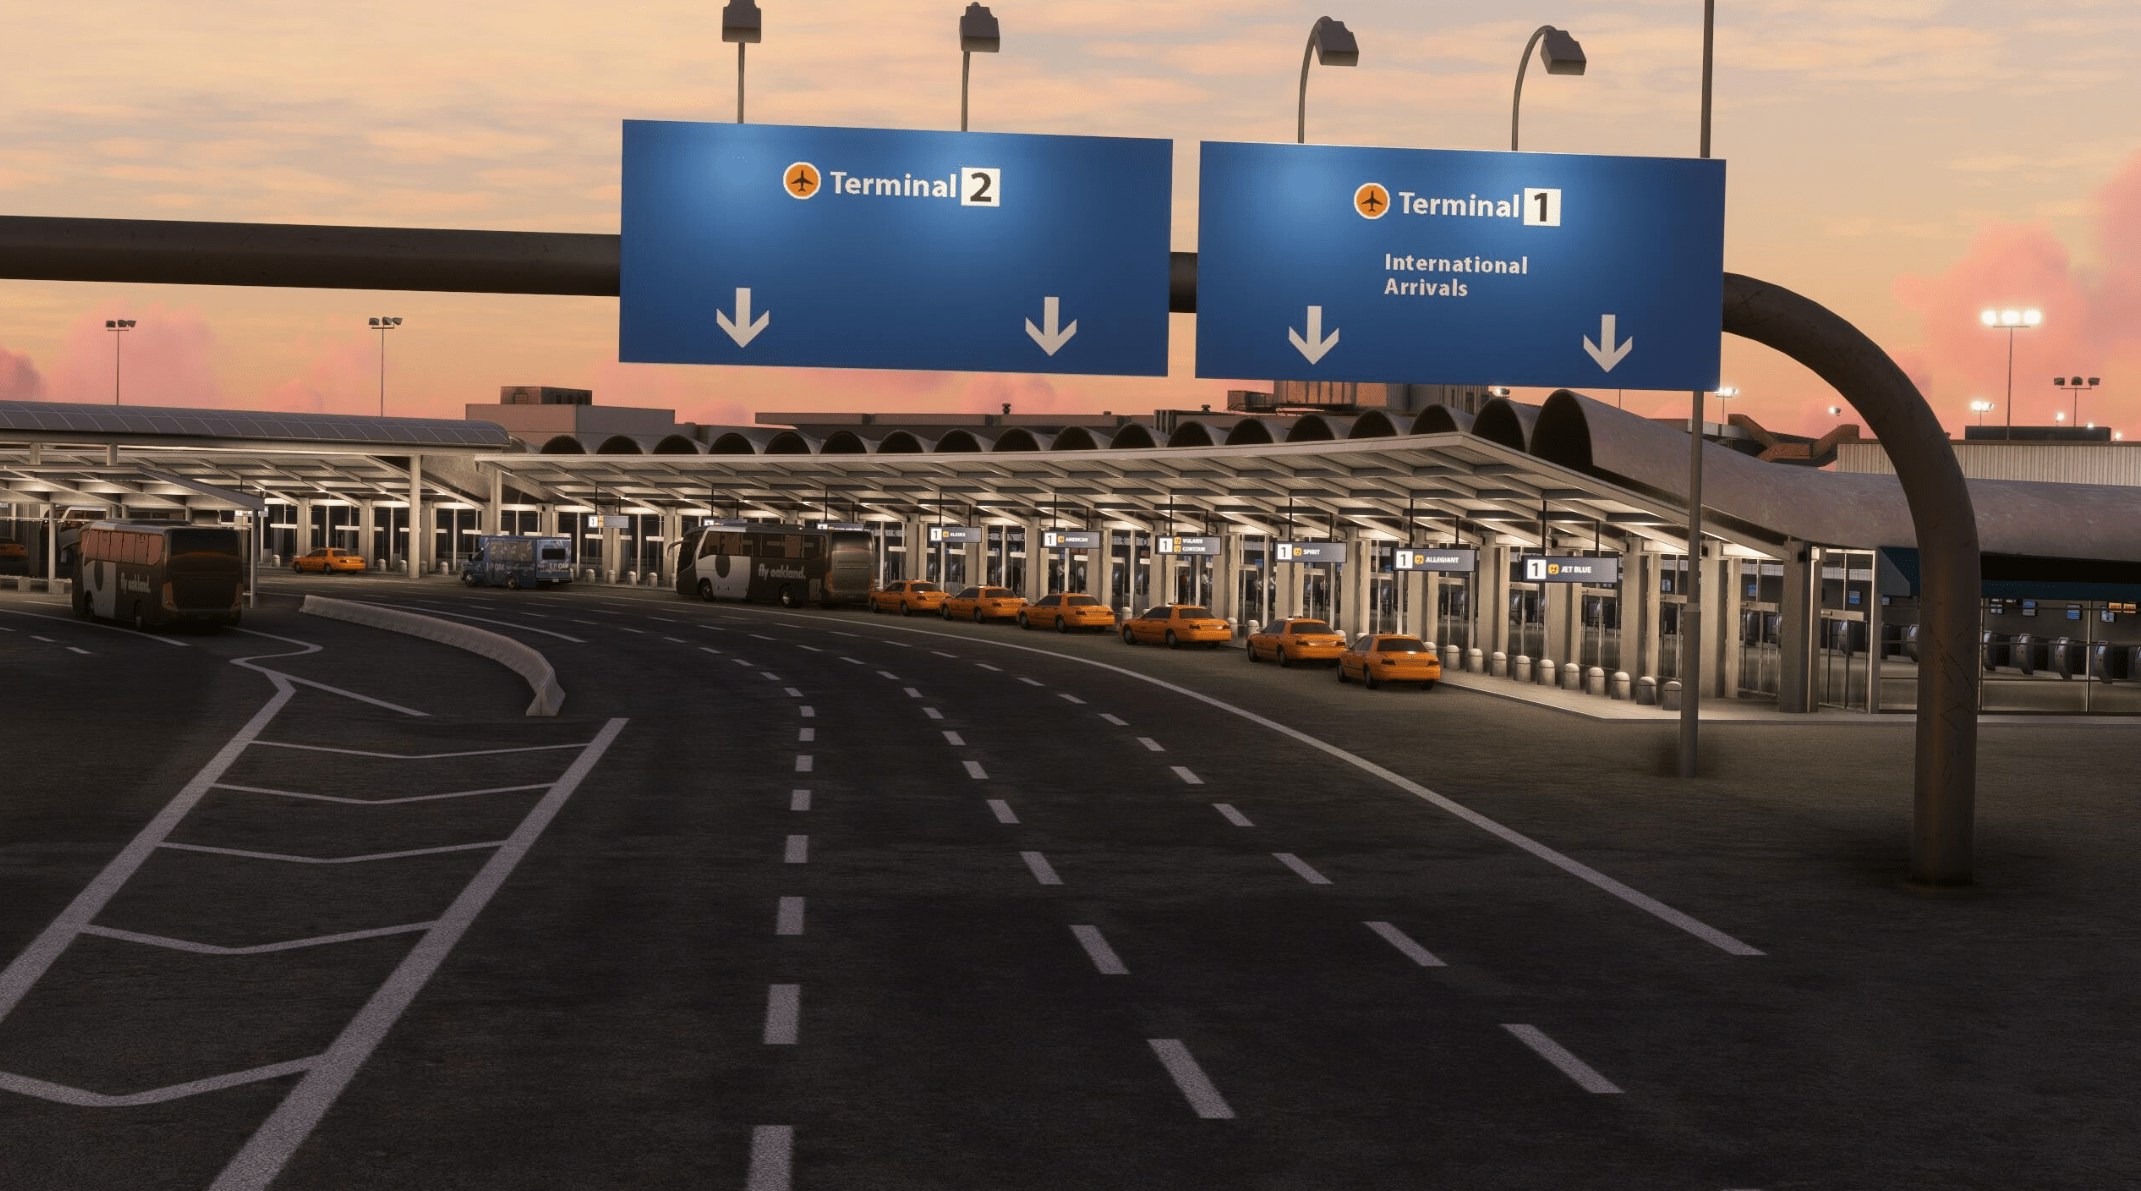 BMWorld & AmSim Release Oakland Airport for MSFS